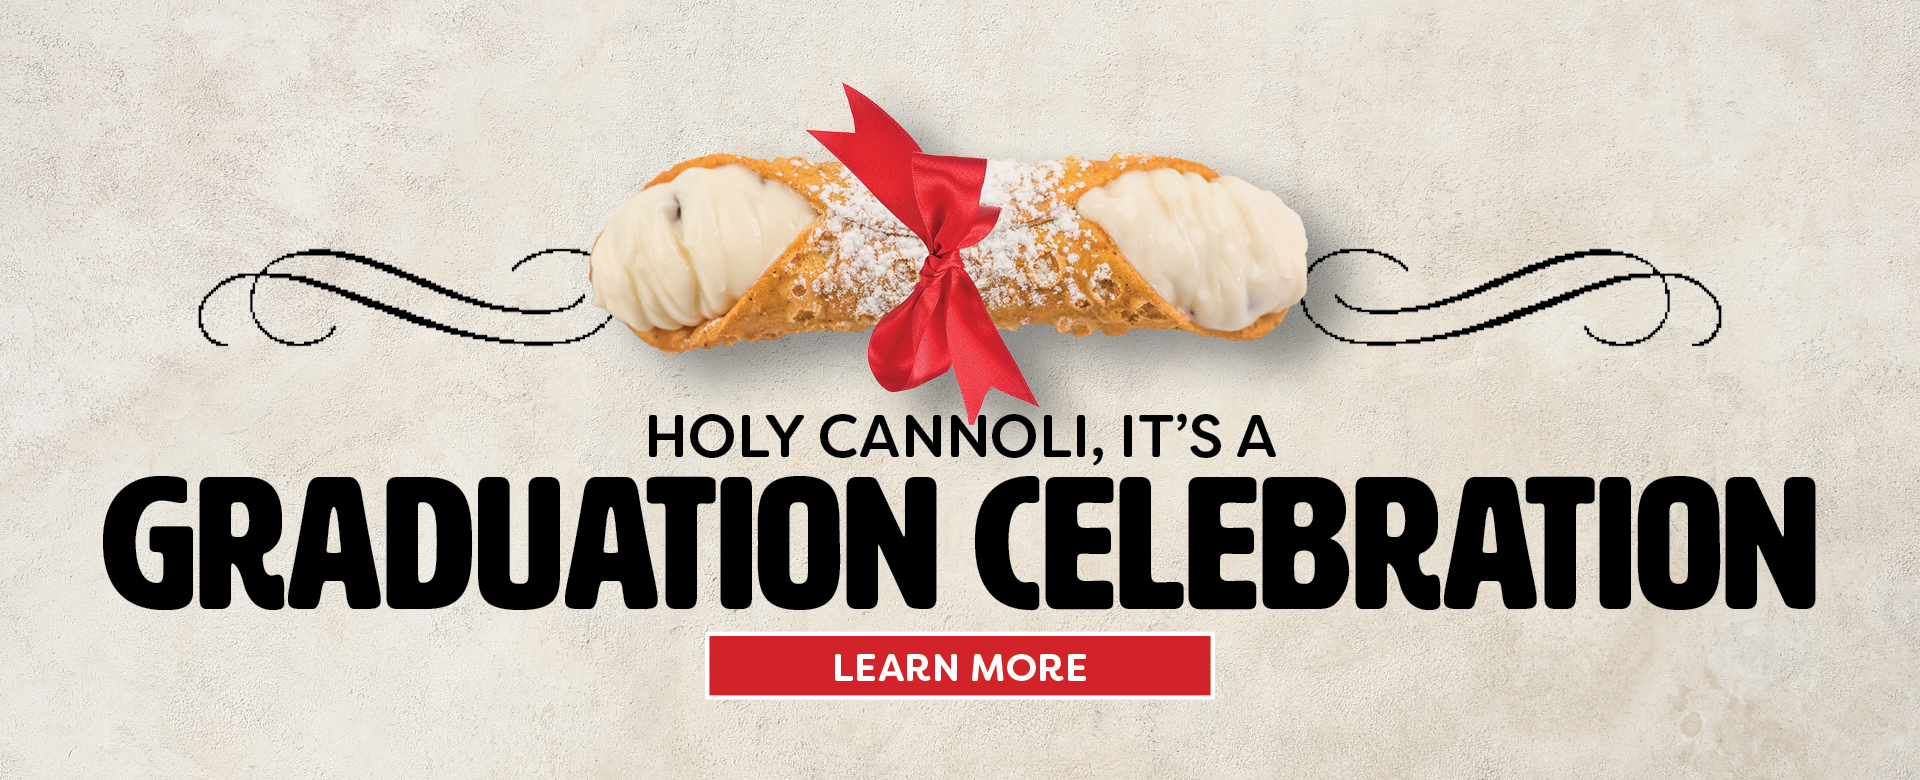 Holy Cannoli, it's a graduation celebration. Click to learn more